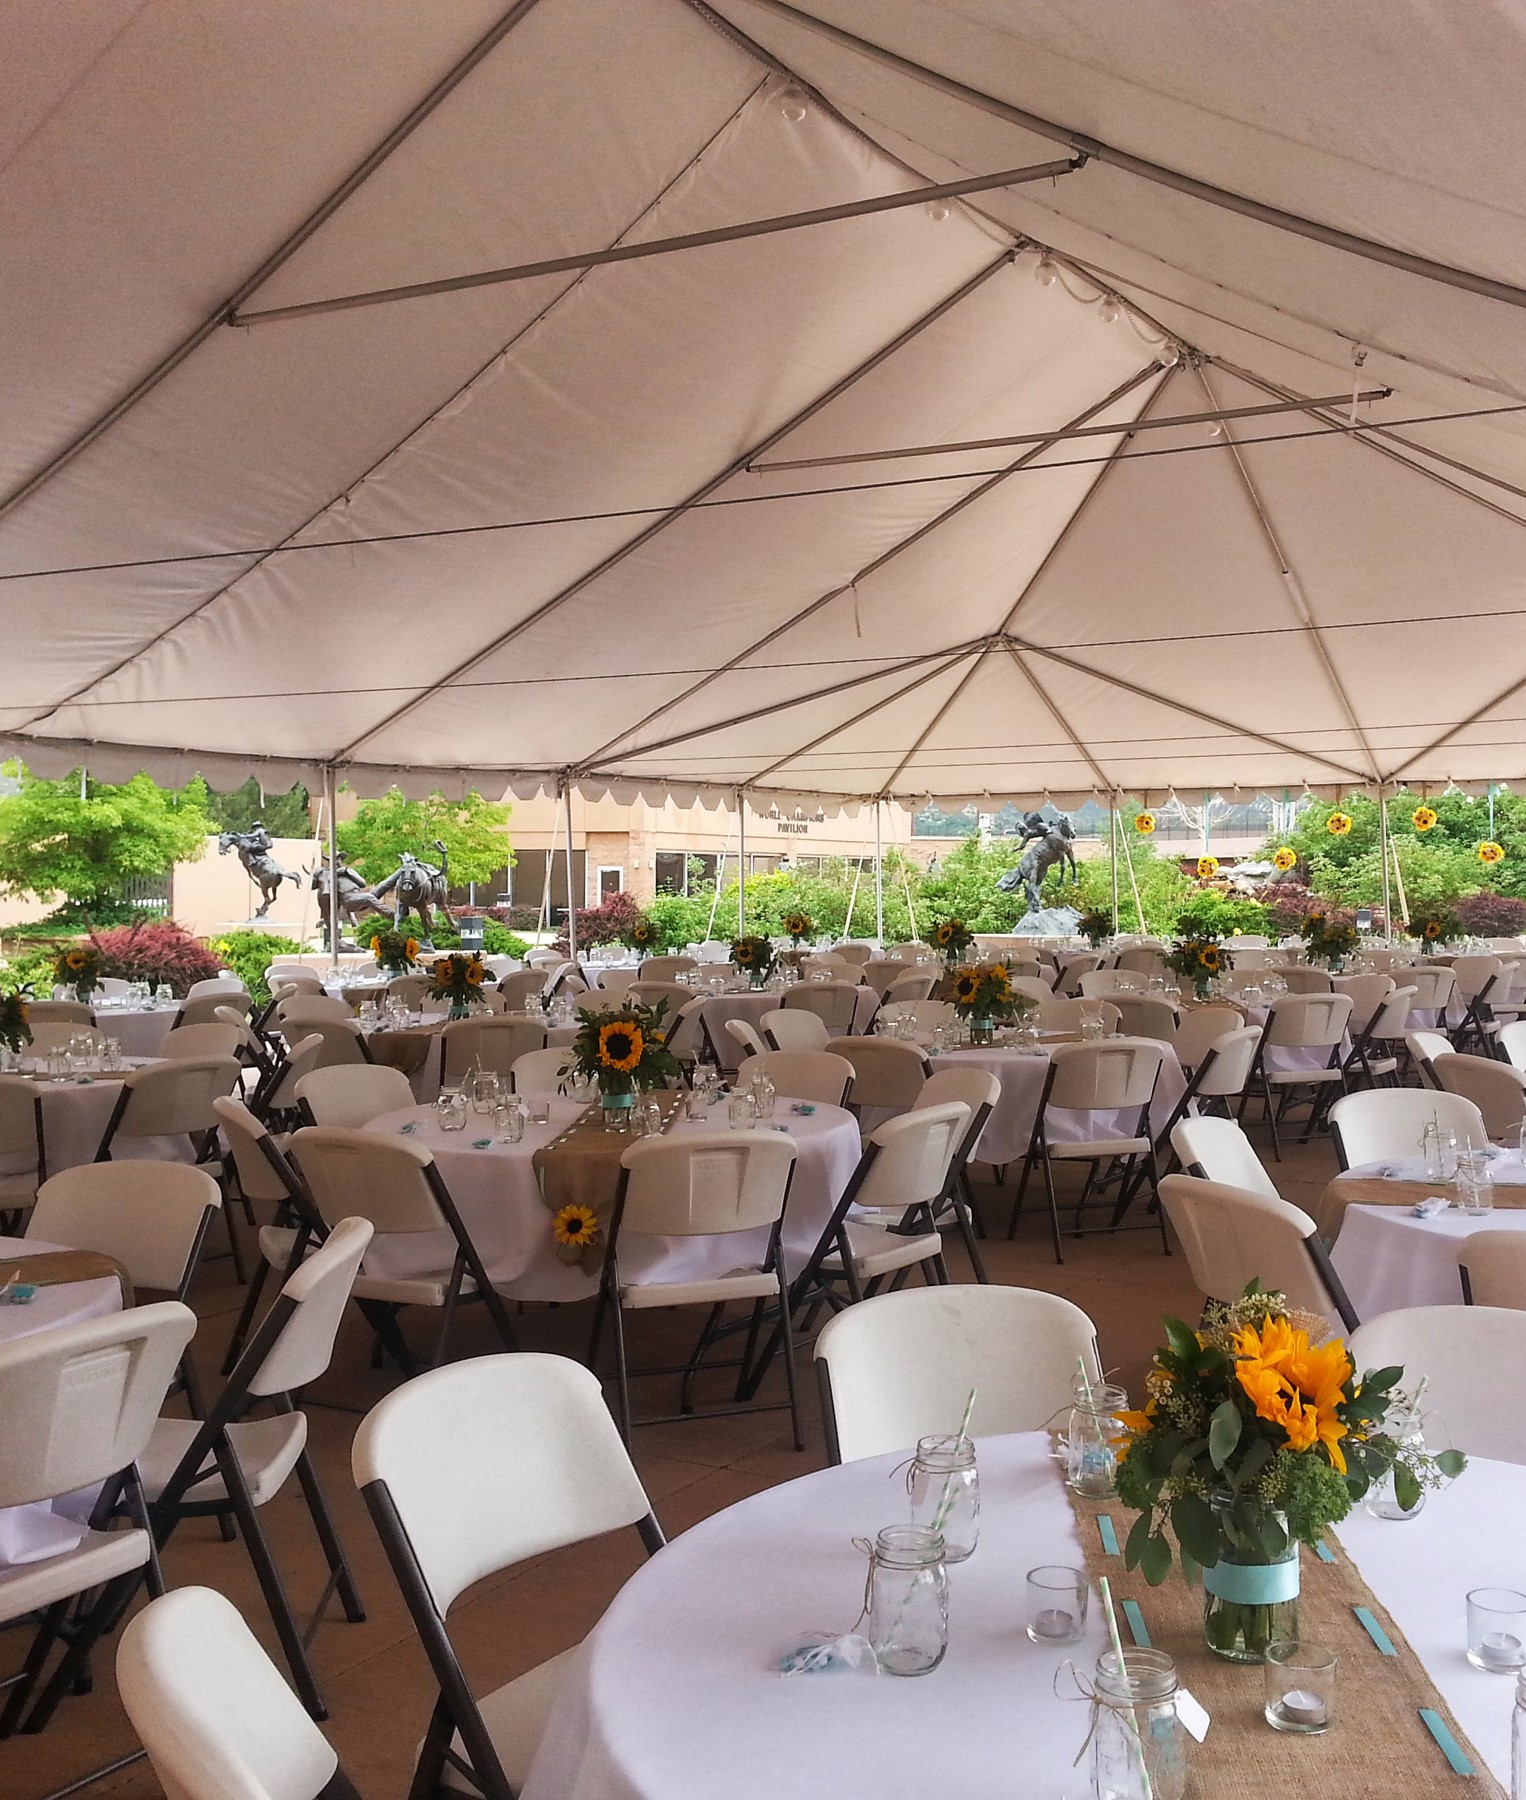 ProRodeo Hall of Fame Best of Colorado Wedding Venues